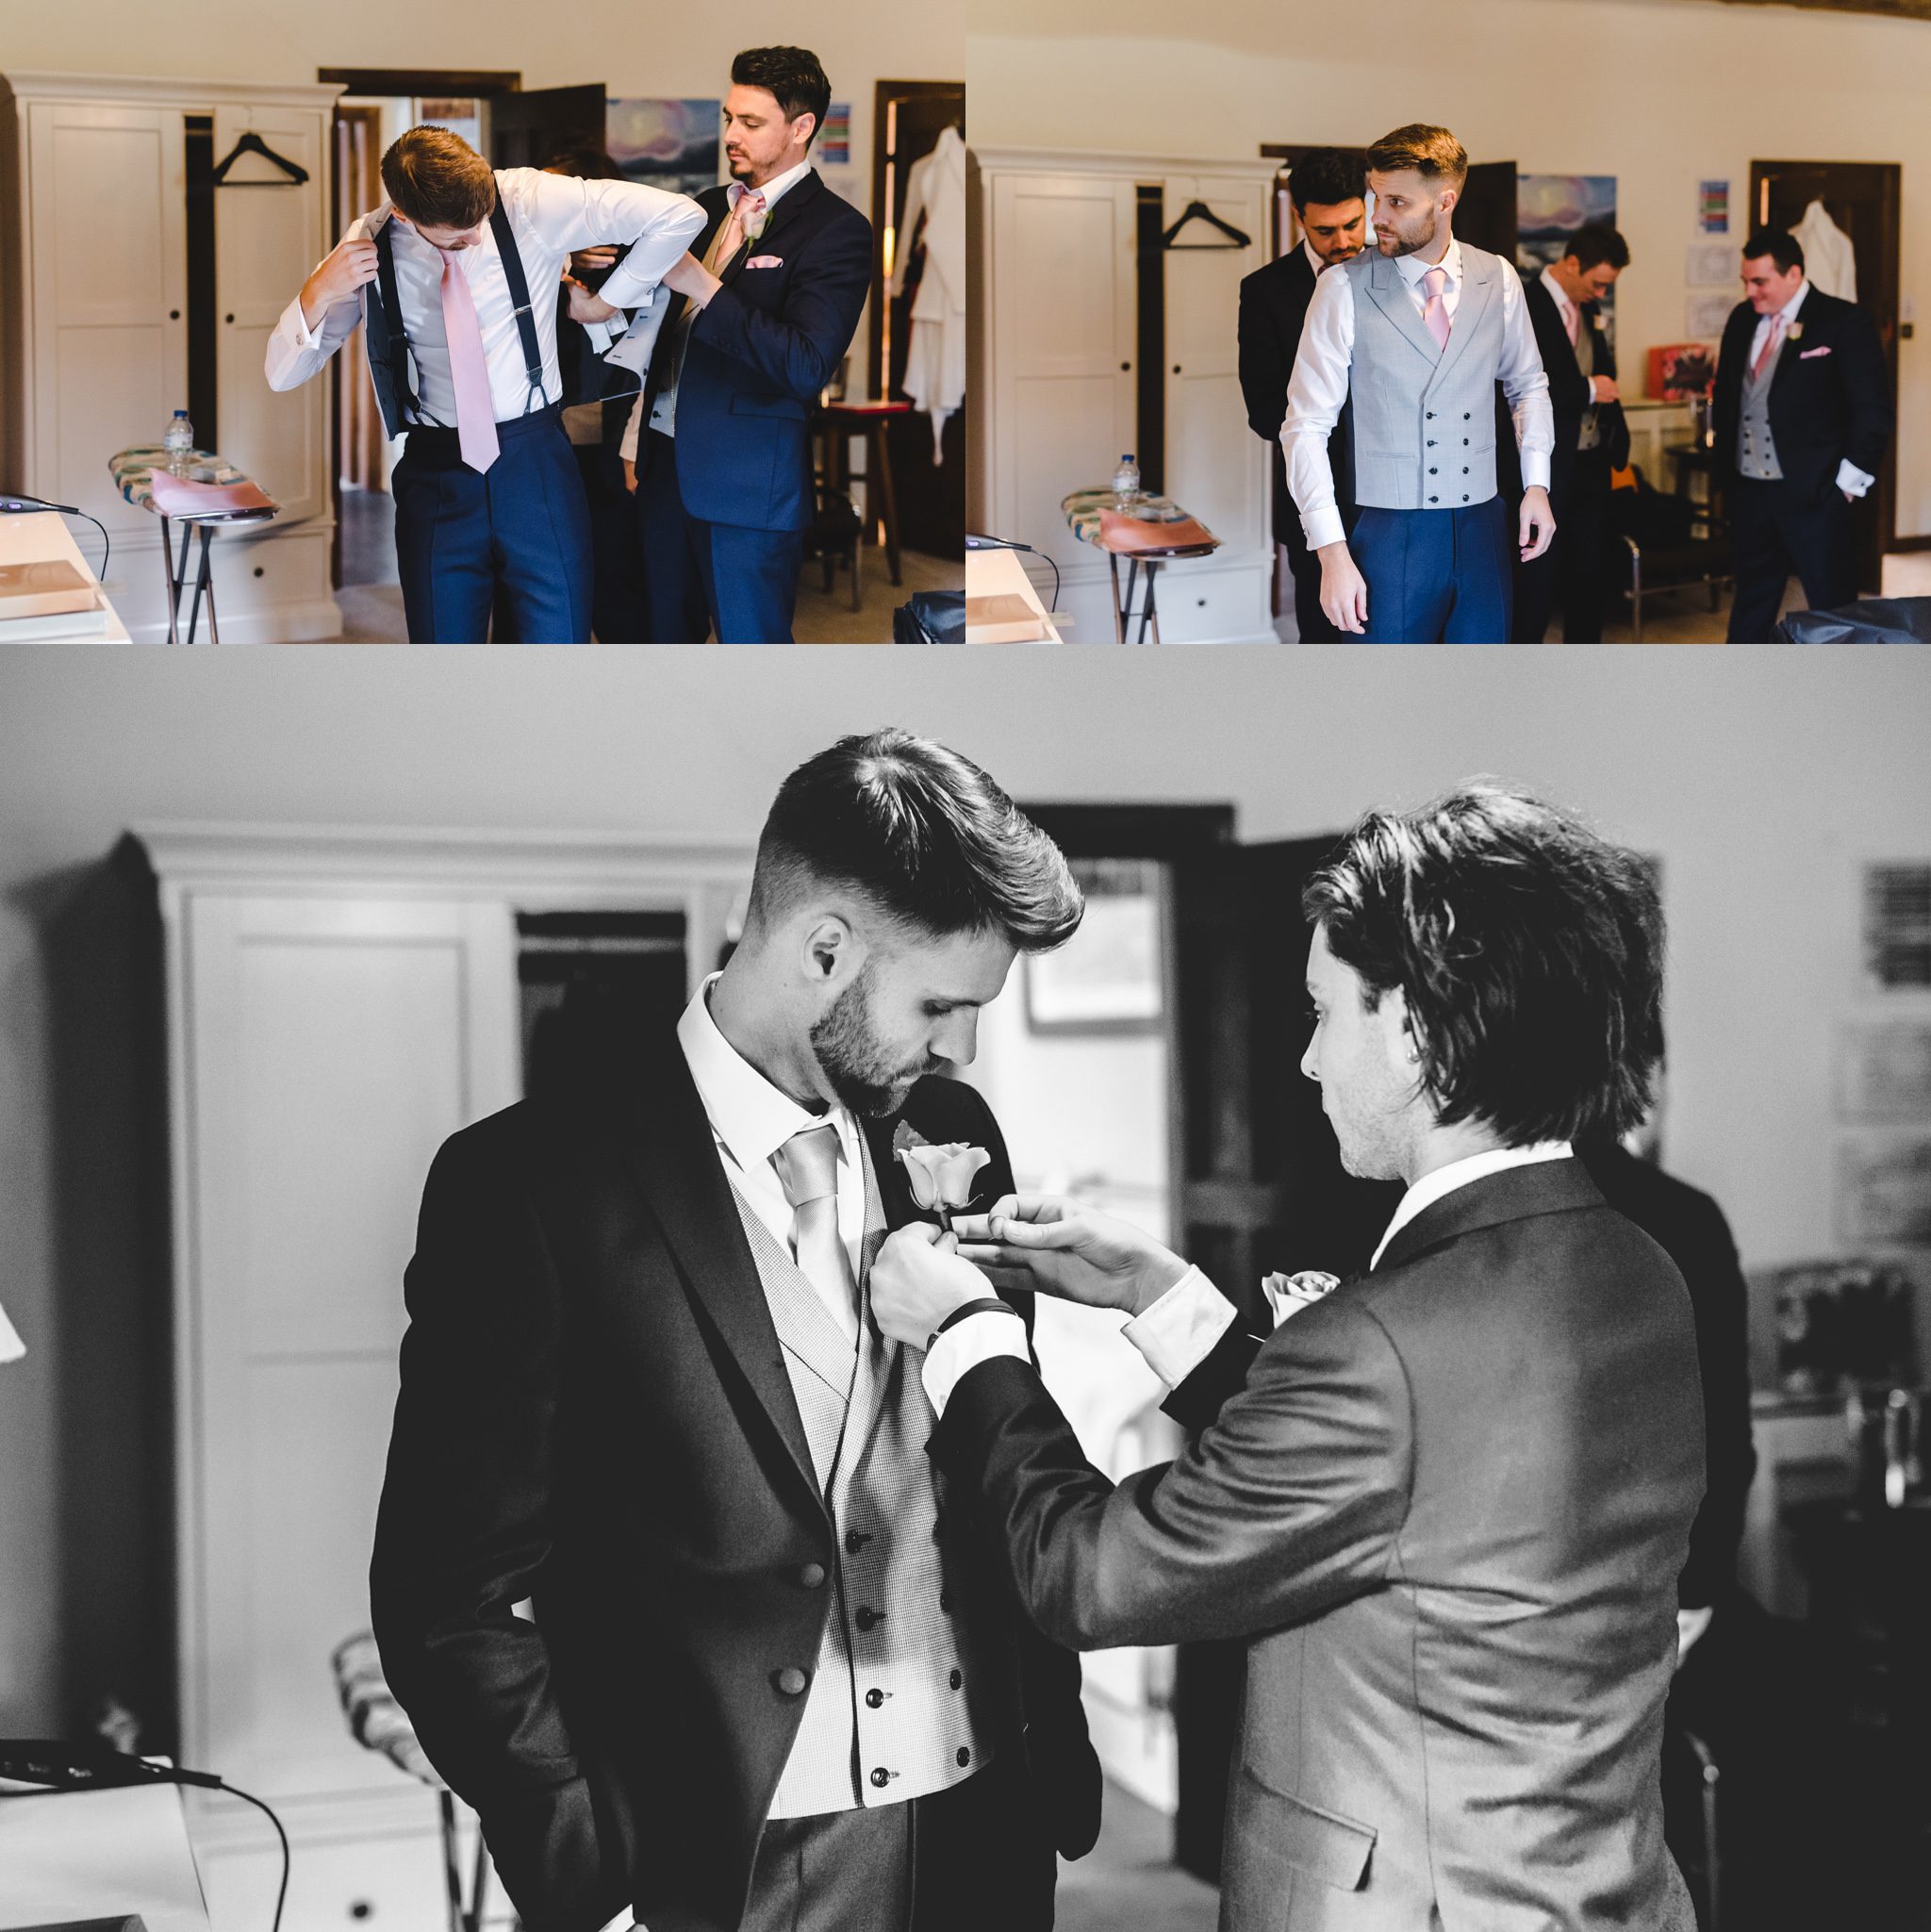 A groom at Brinsop getting dressed for his wedding